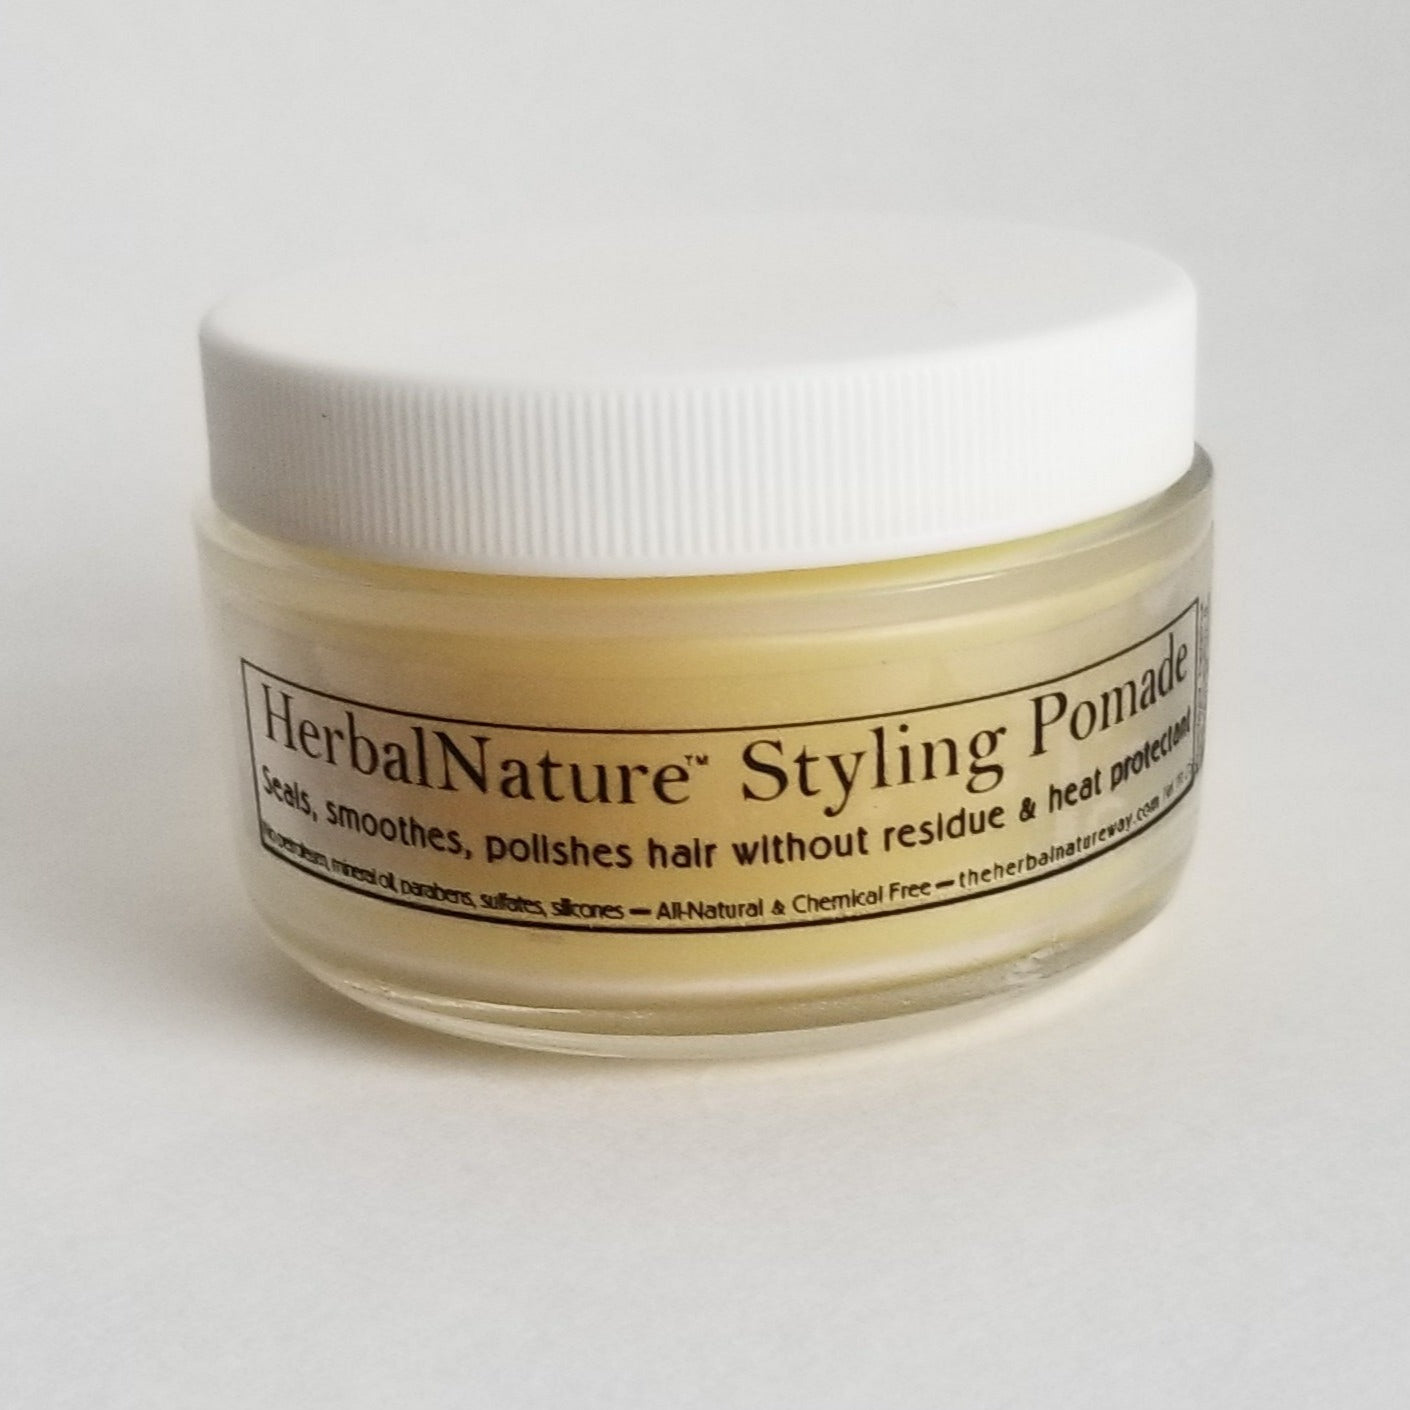 HerbalNature Syling Pomade